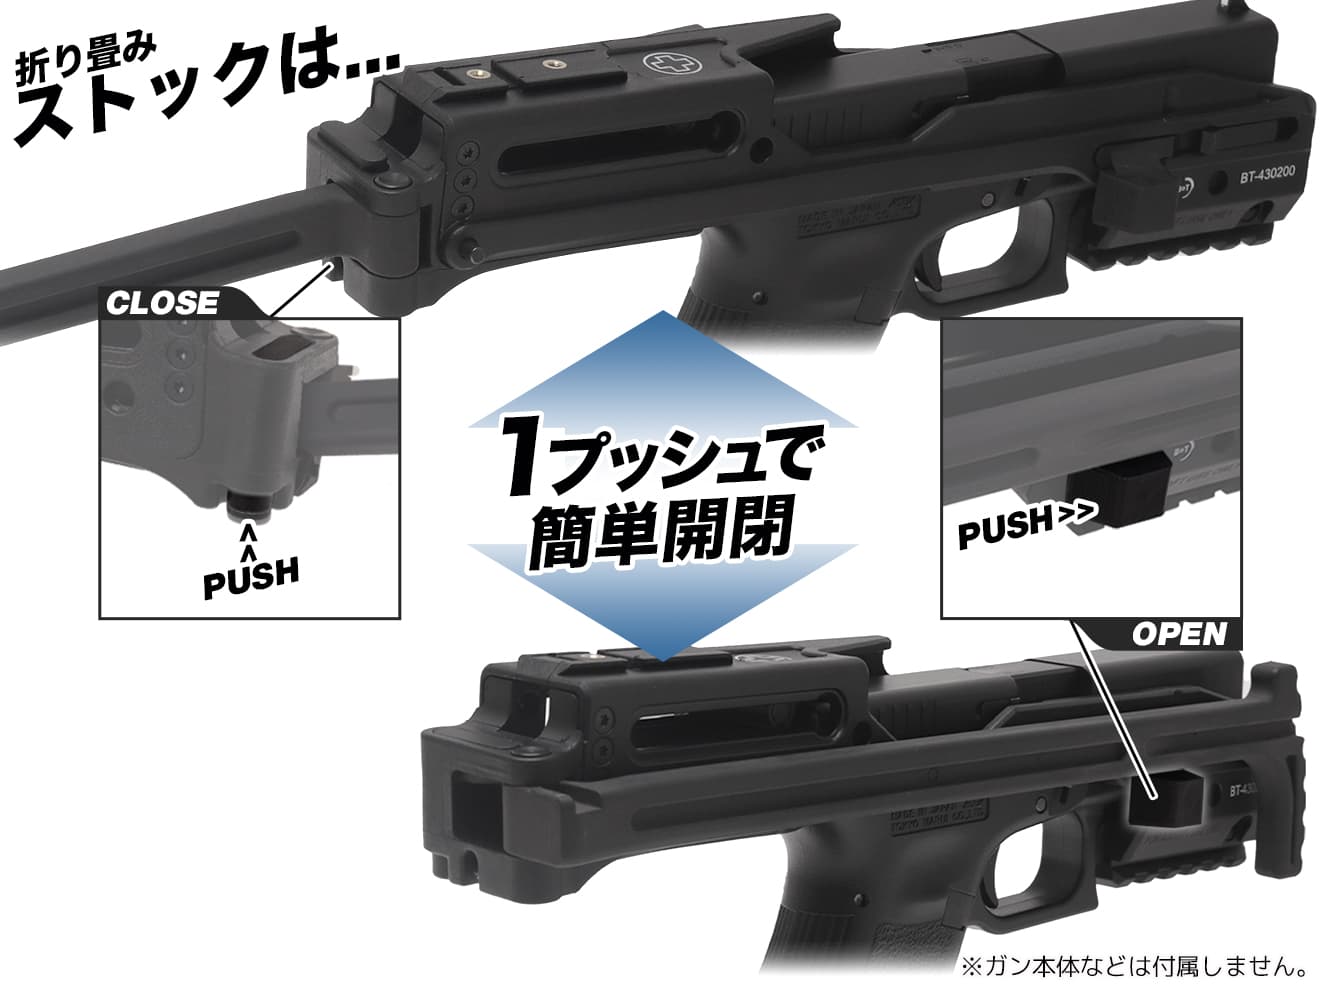 ARCHWICK B&T Air Universal Service Weapon USWカービンキット/ポリマーバージョン(For GLOCK)